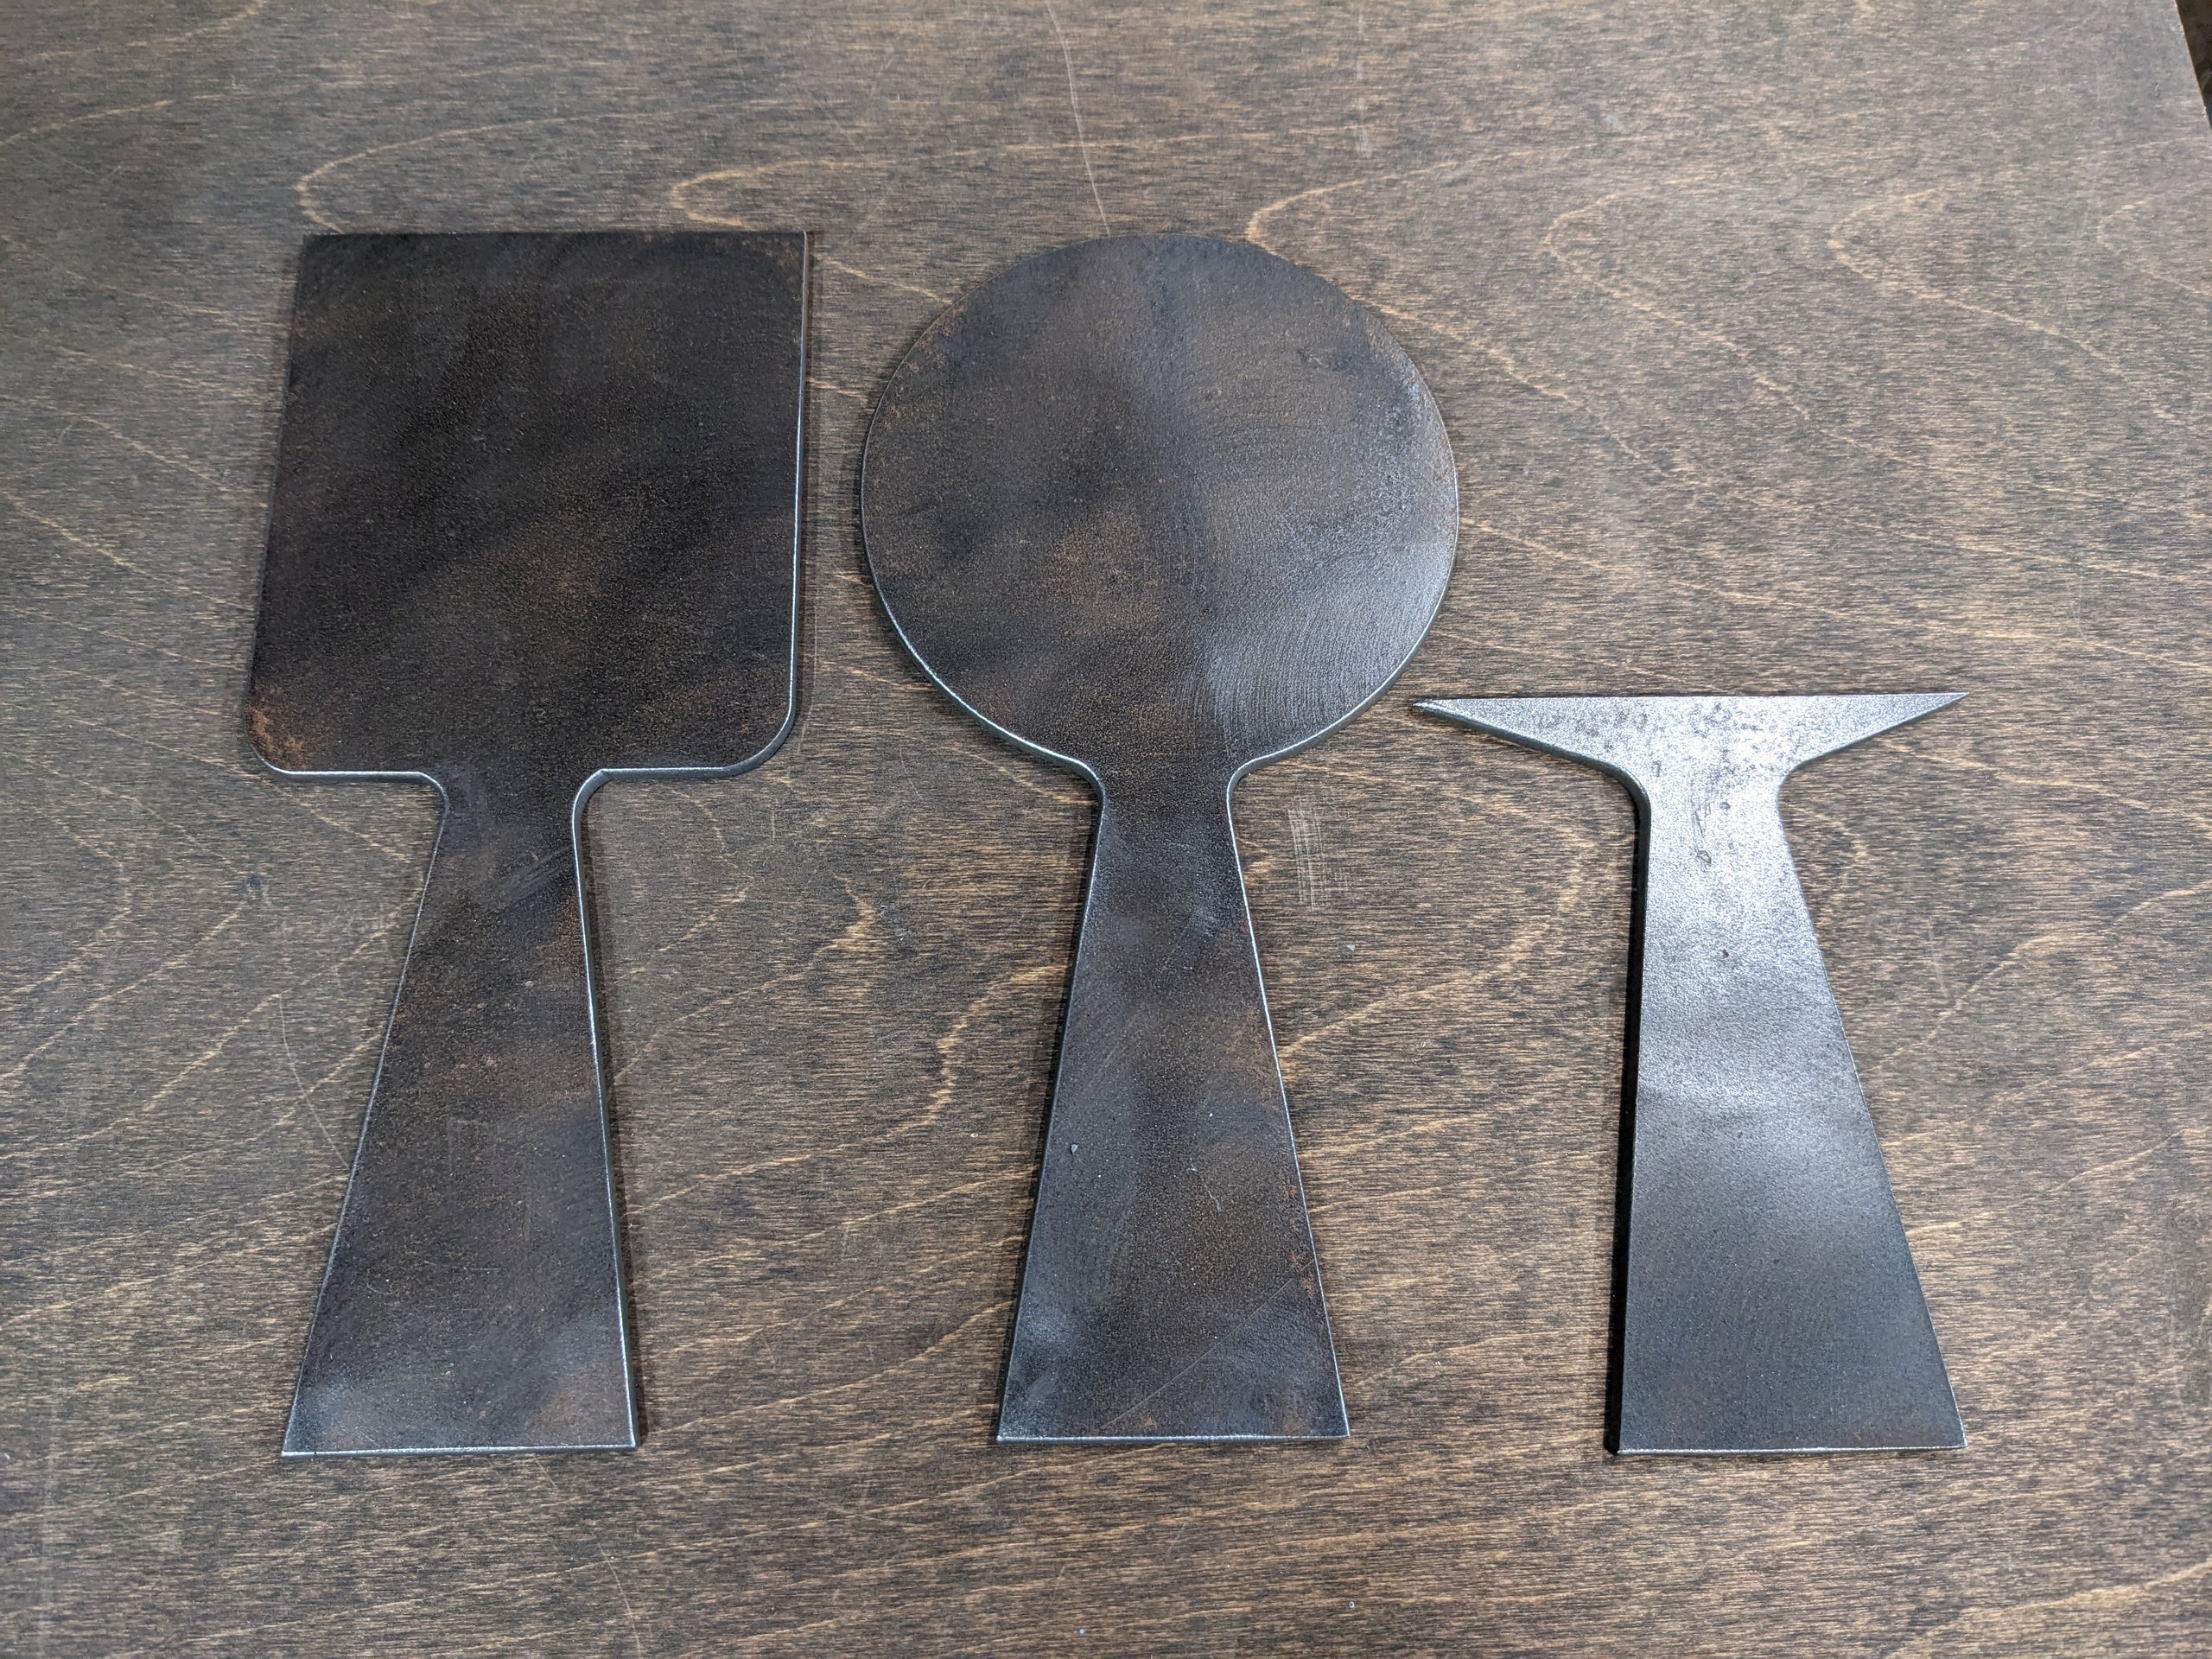 Kitchen Utensil Blank Set: Spatula, Ladle, and Meat Fork